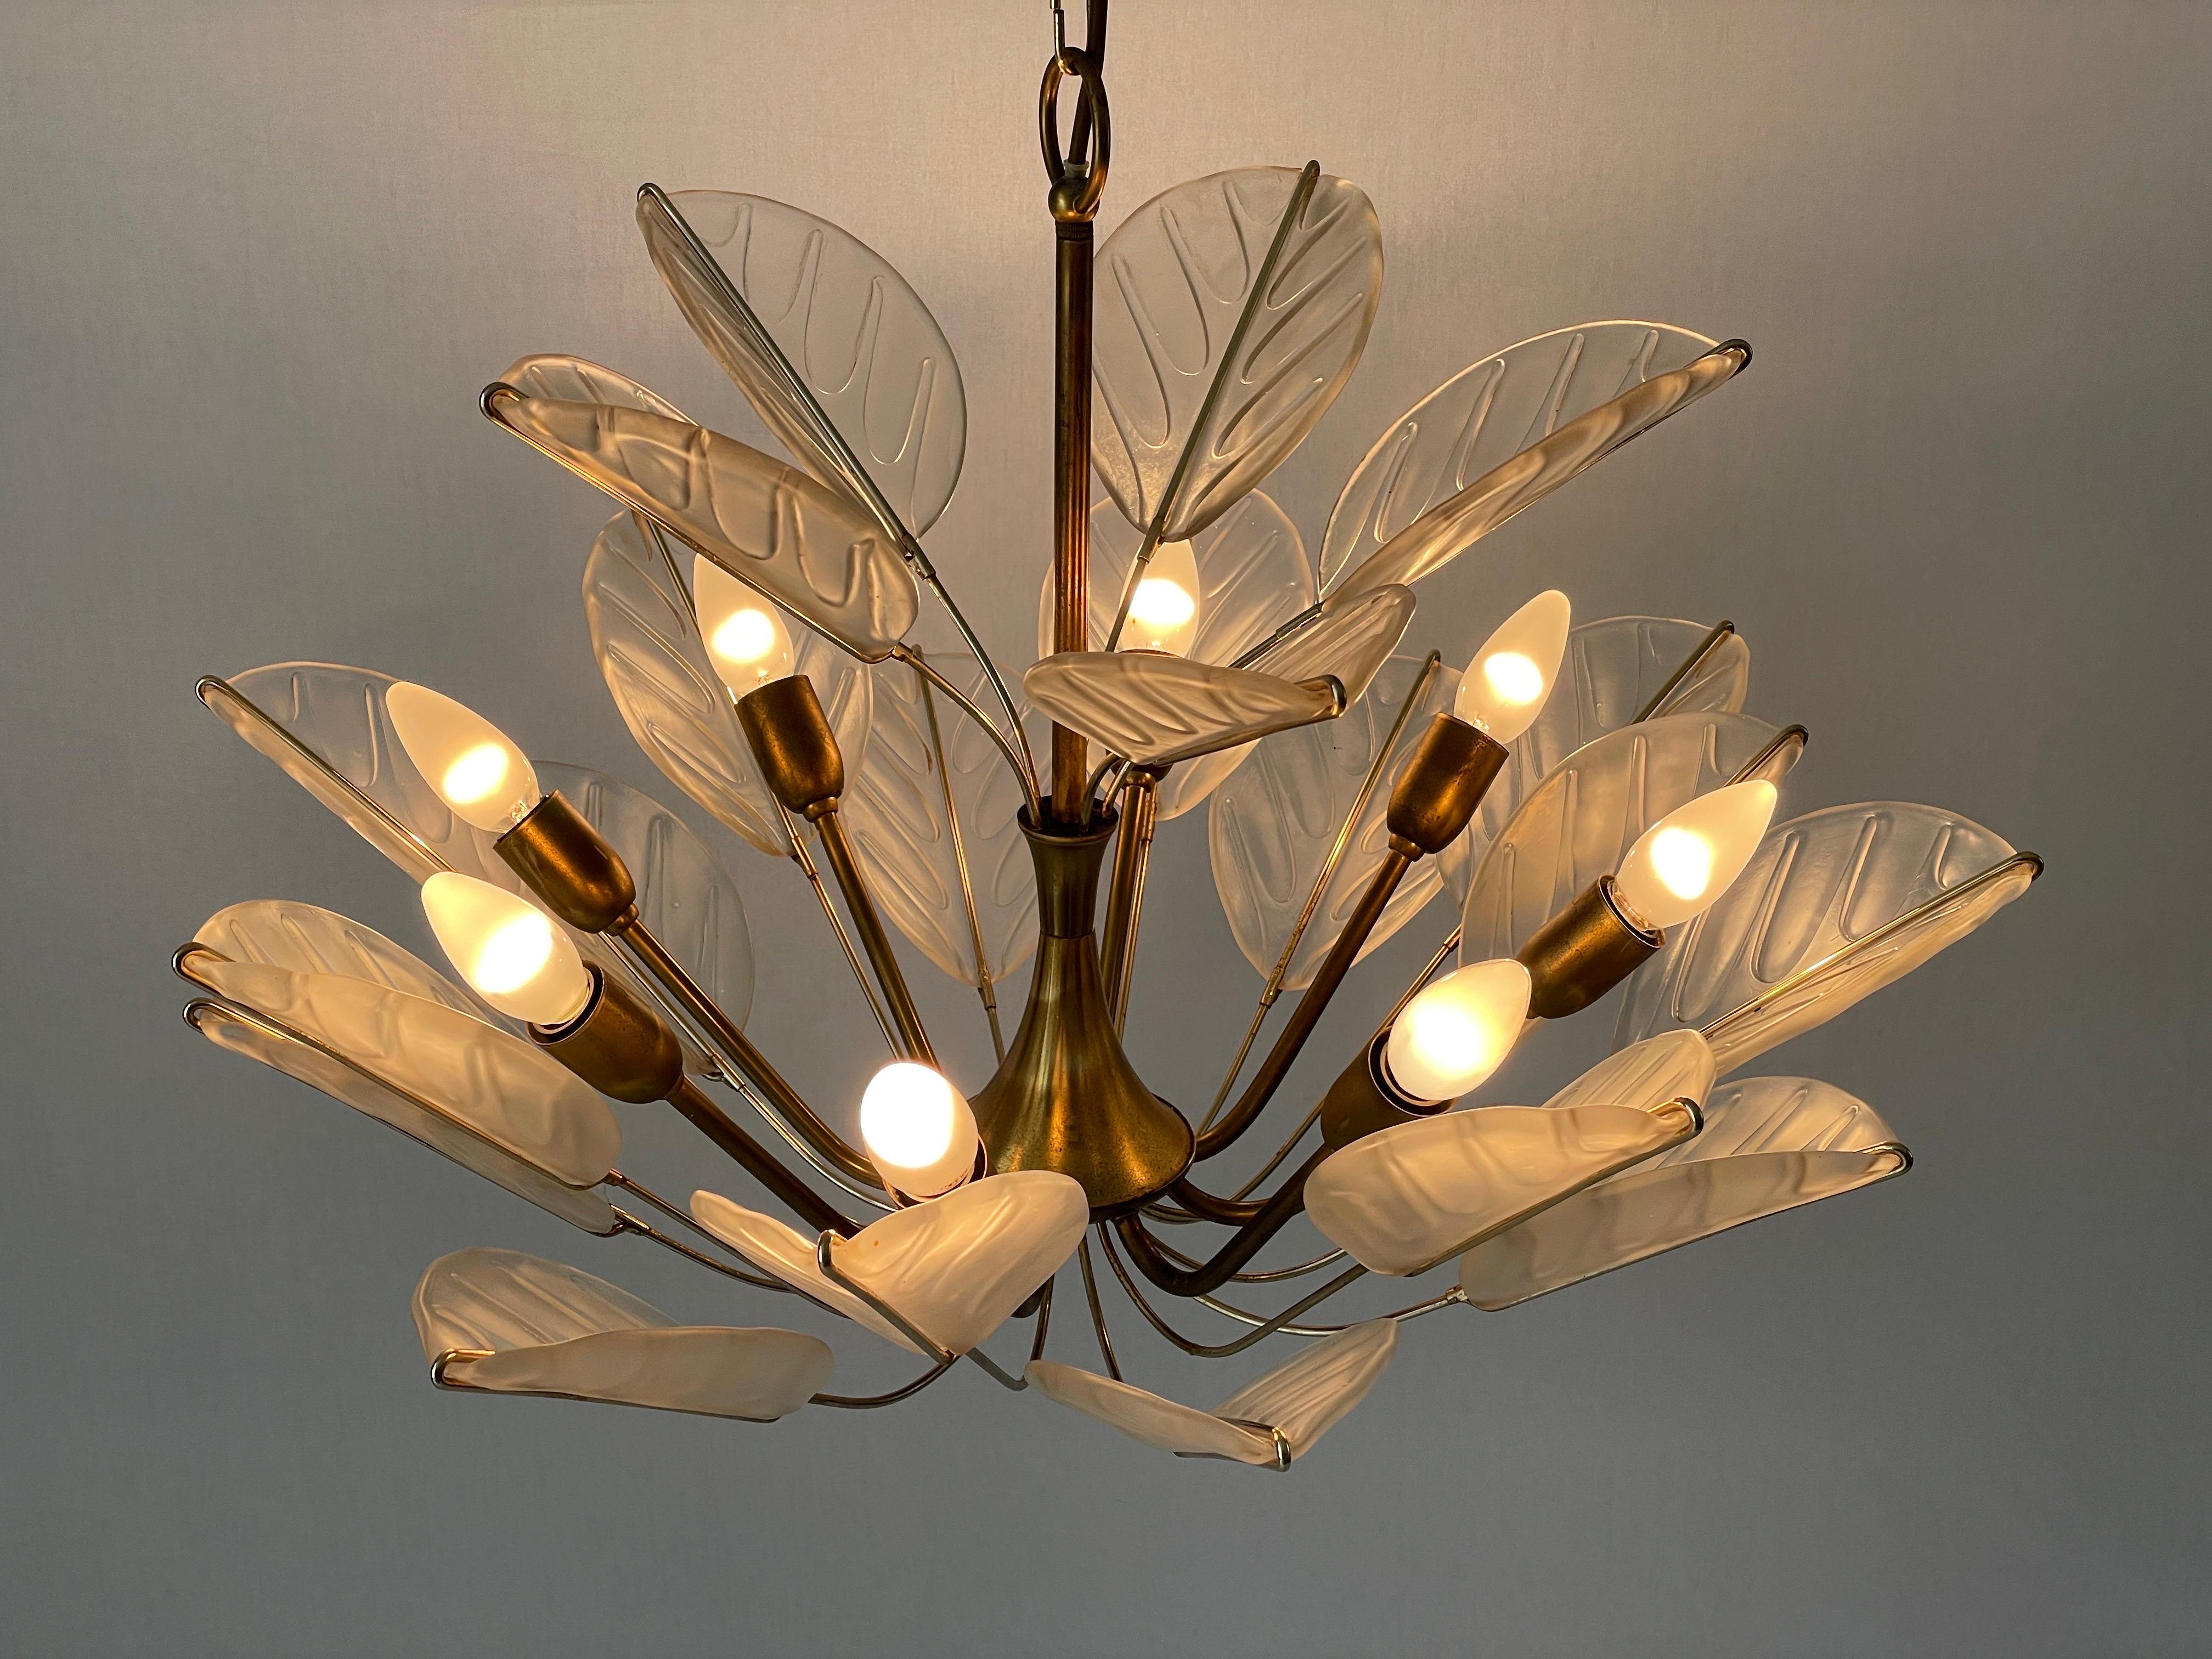 Luxurious 8-armed Brass Chandelier with Crystal Glass Leaves, 1960s, Germany For Sale 8